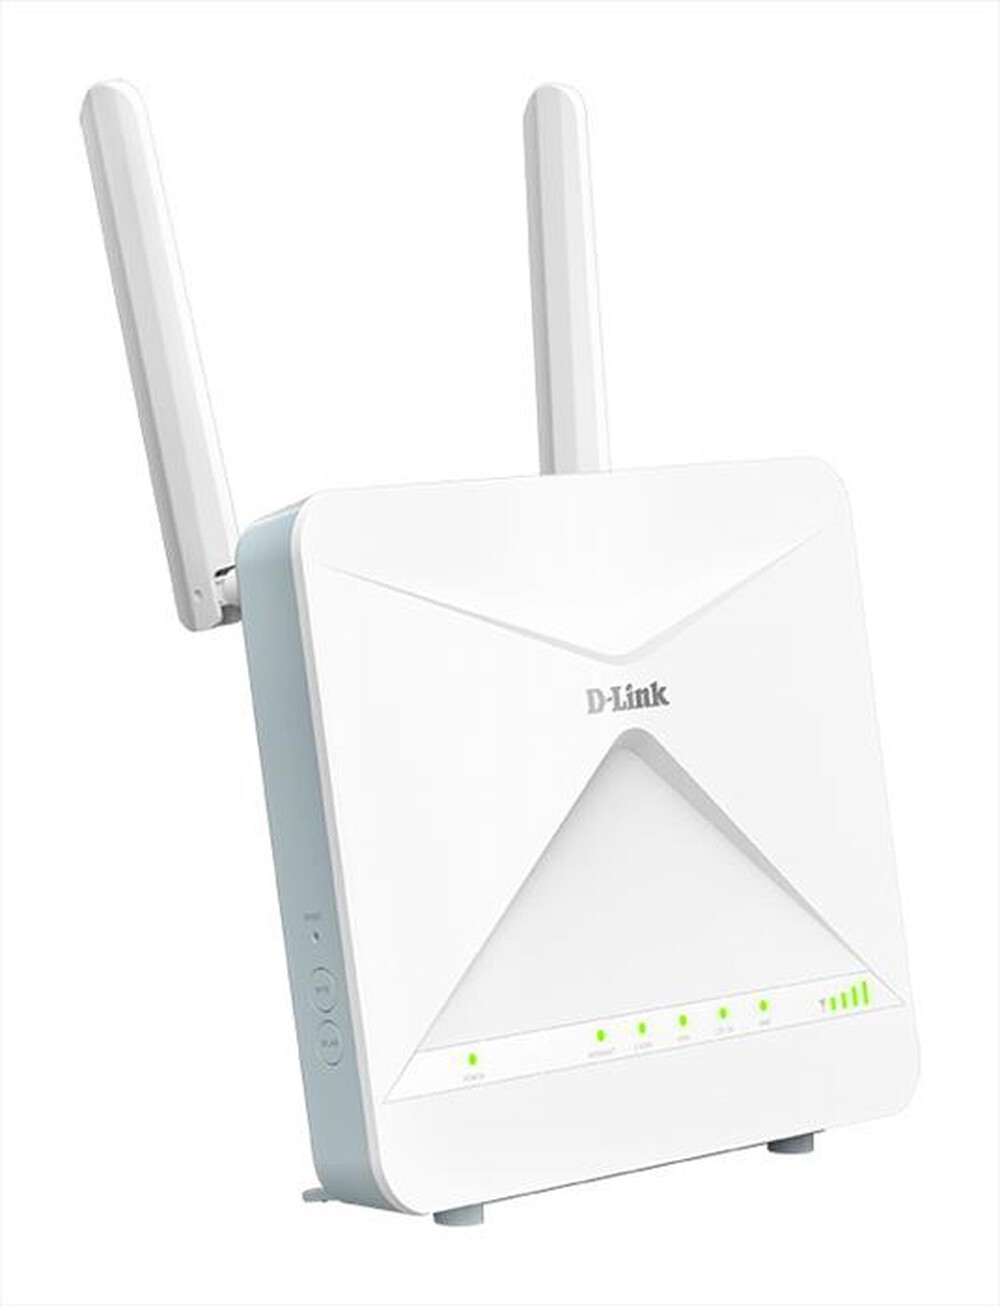 "D-LINK - Router G415-BIANCO"